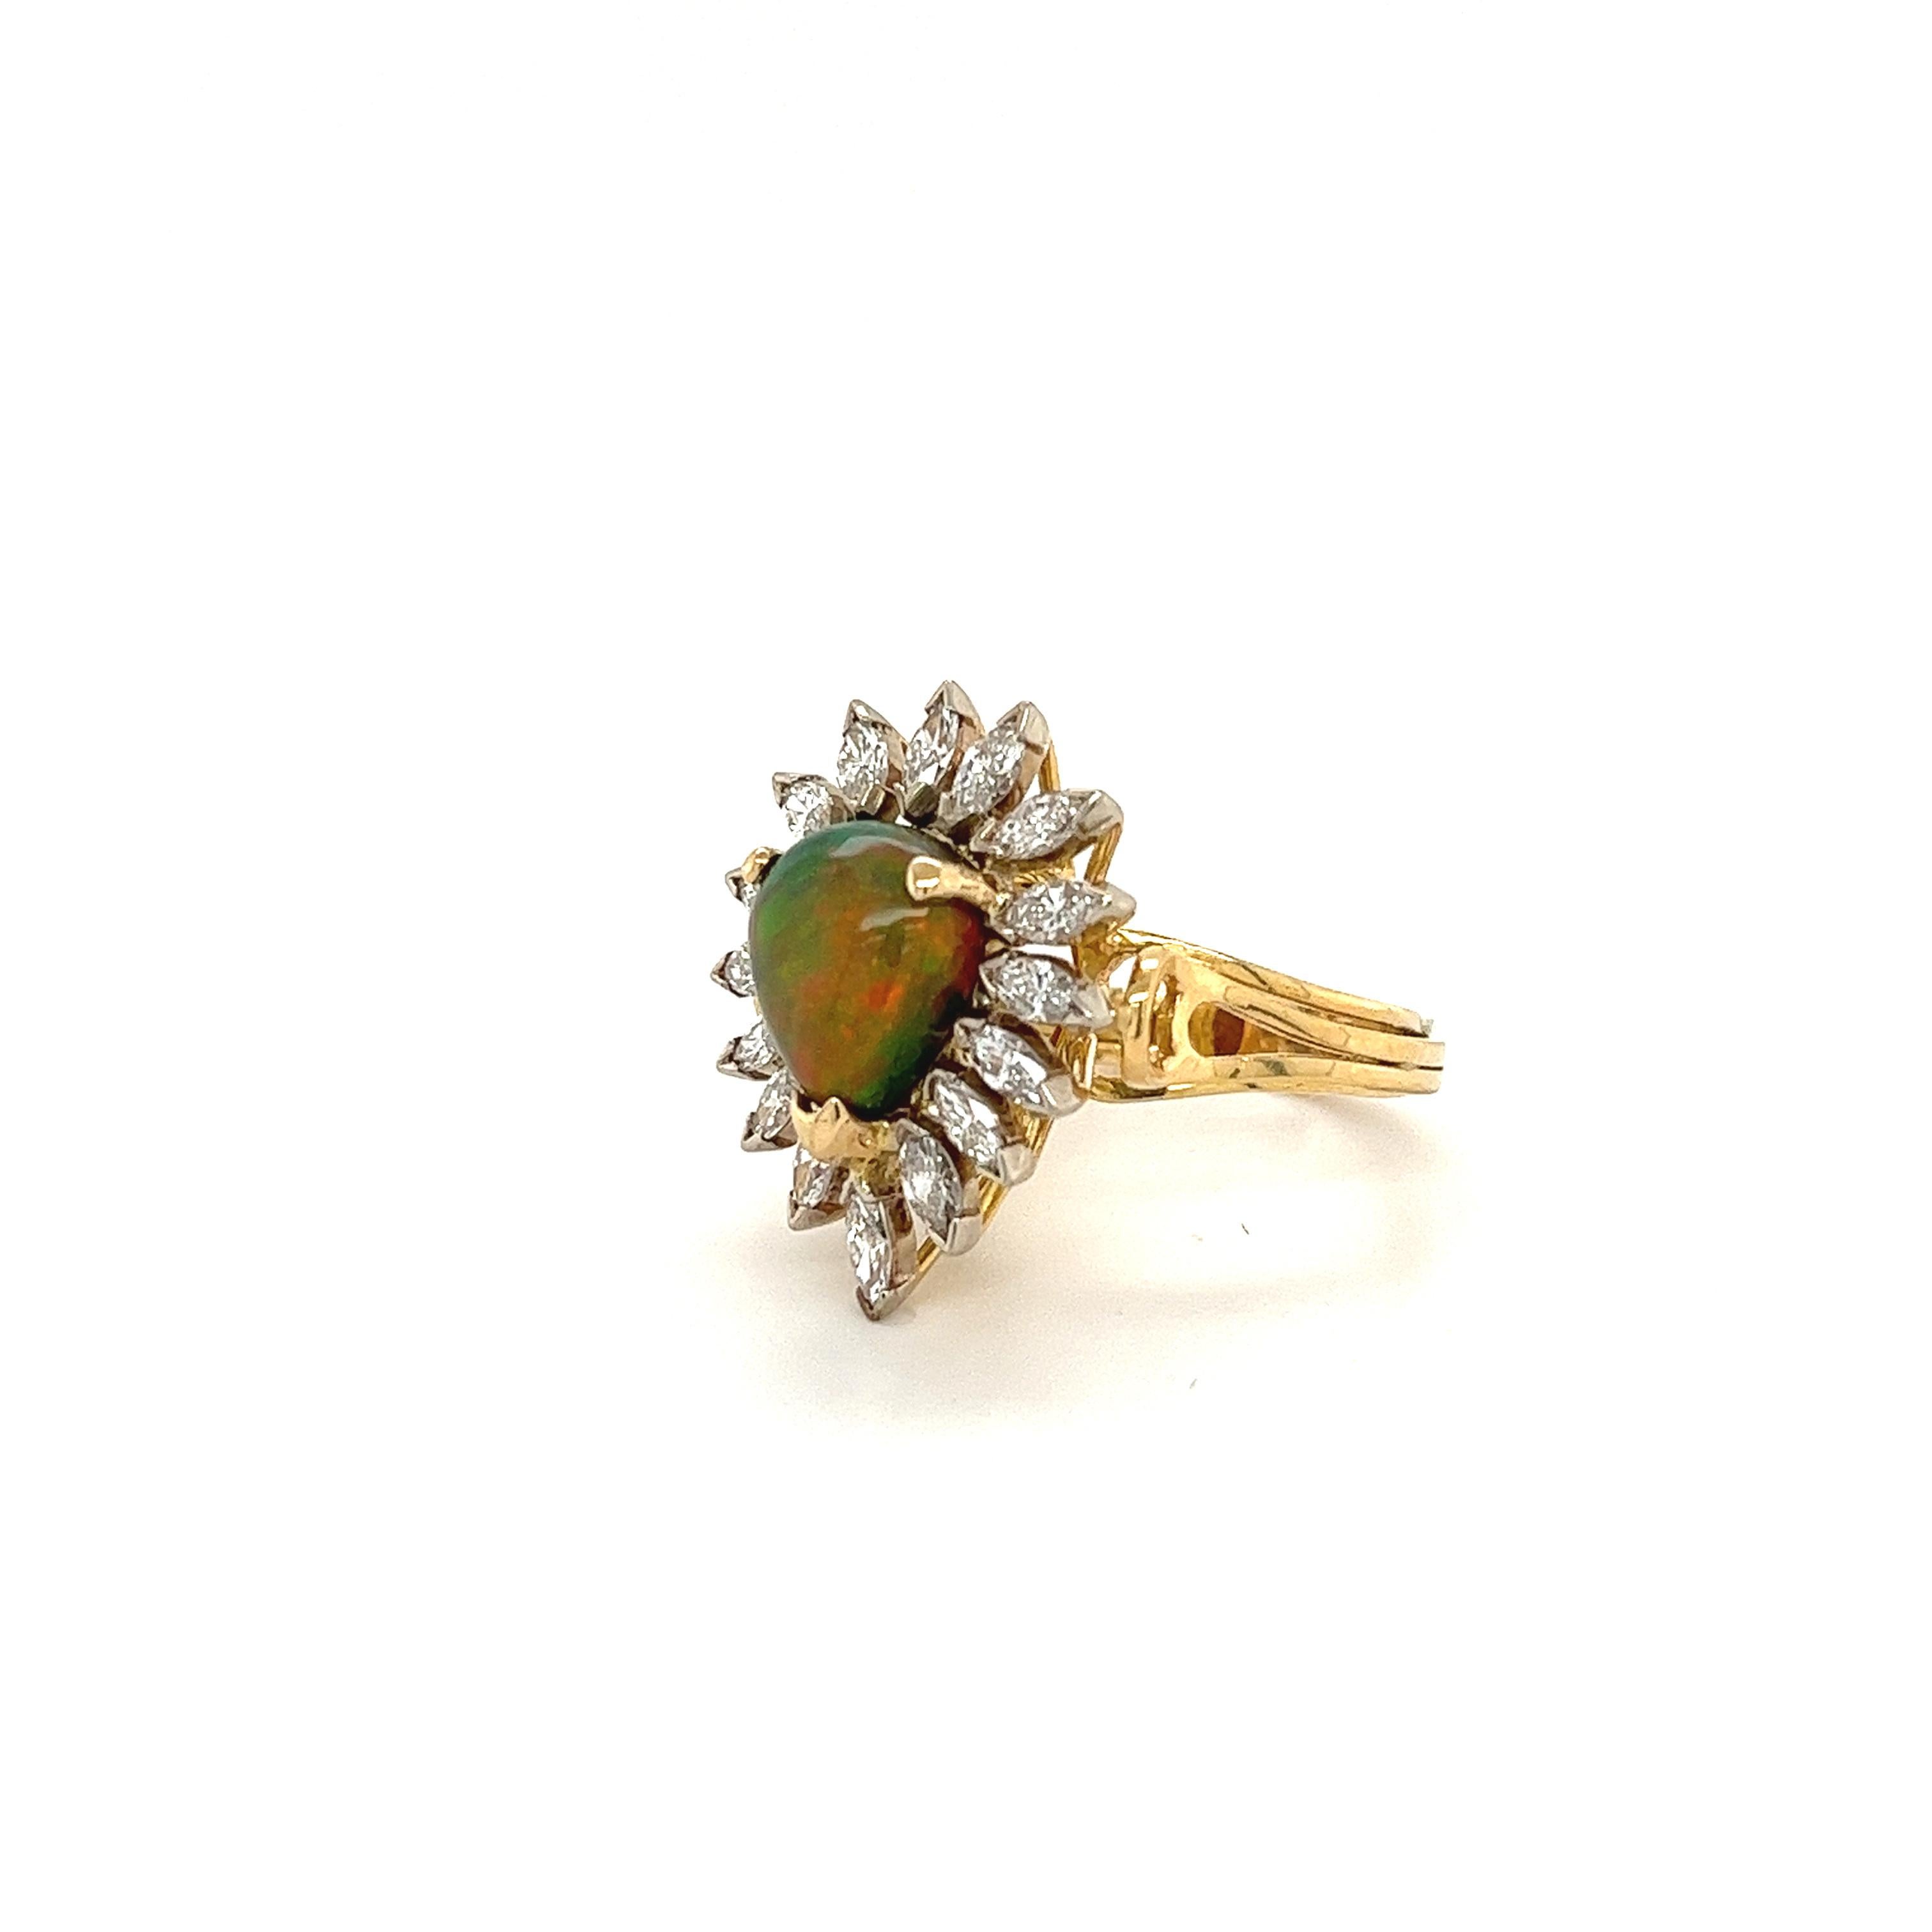 3.50-carat natural pear-shaped opal with over 3 carats in a marquise cut natural diamond halo. Euro flair ring shank set in 18 karat solid yellow gold. Polished finish for long-lasting brilliance and shine, Hypoallergenic, and ideal for daily wear. 